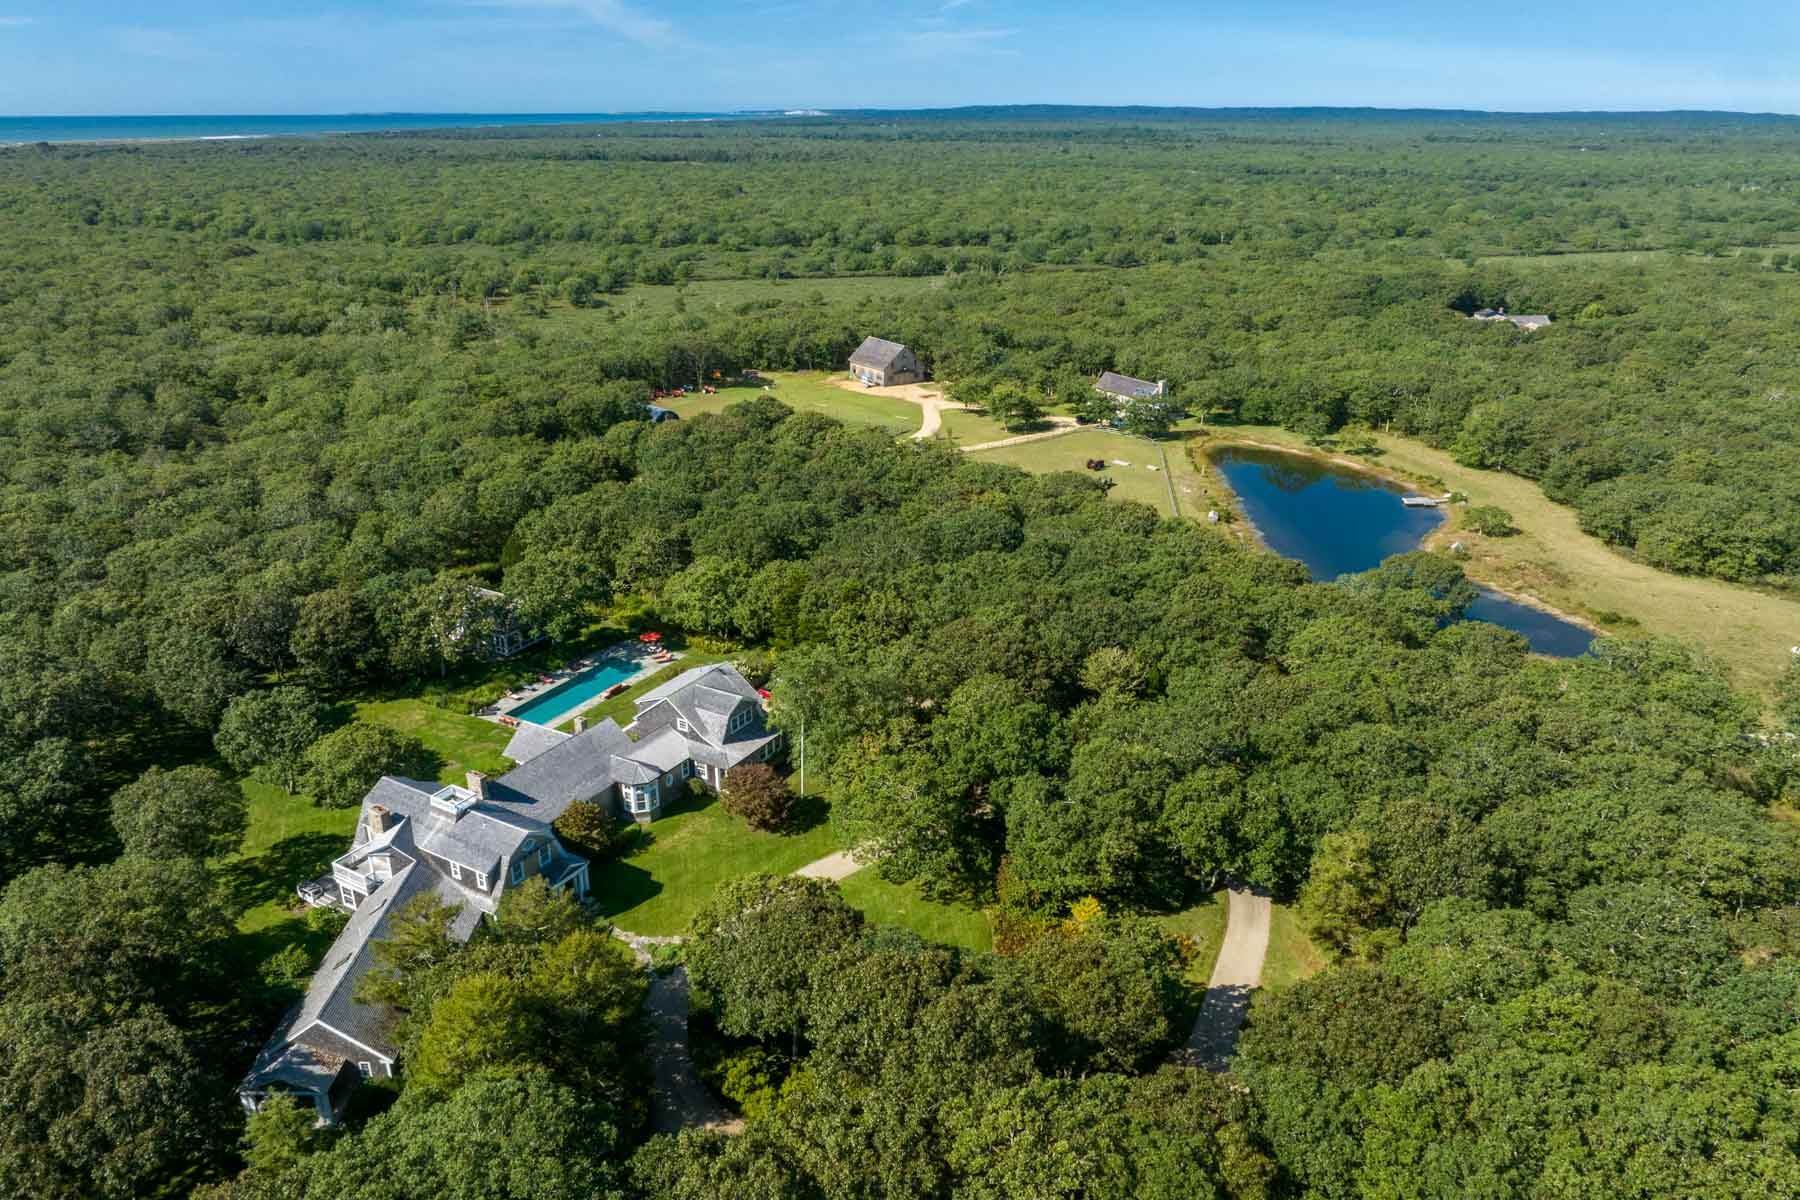 Single Family Homes for Sale at Prestigious Boldwater Estate on 22 Acres 10 Boldwater Road, 12 Boldwater Road Edgartown, Massachusetts 02539 United States